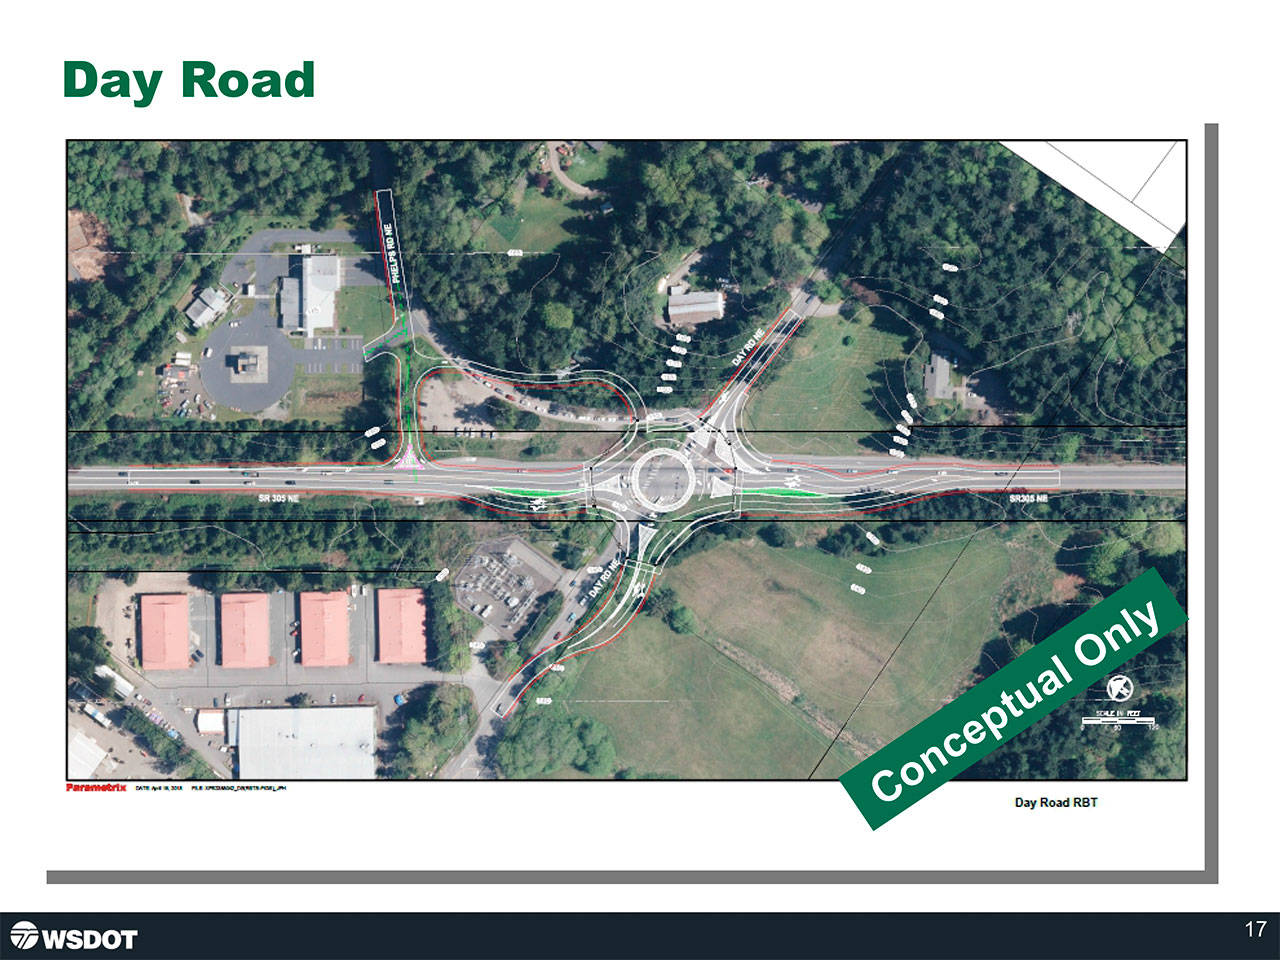 A view of the proposed Highway 305 roundabout at Day Road. (Image courtesy of the city of Poulsbo)